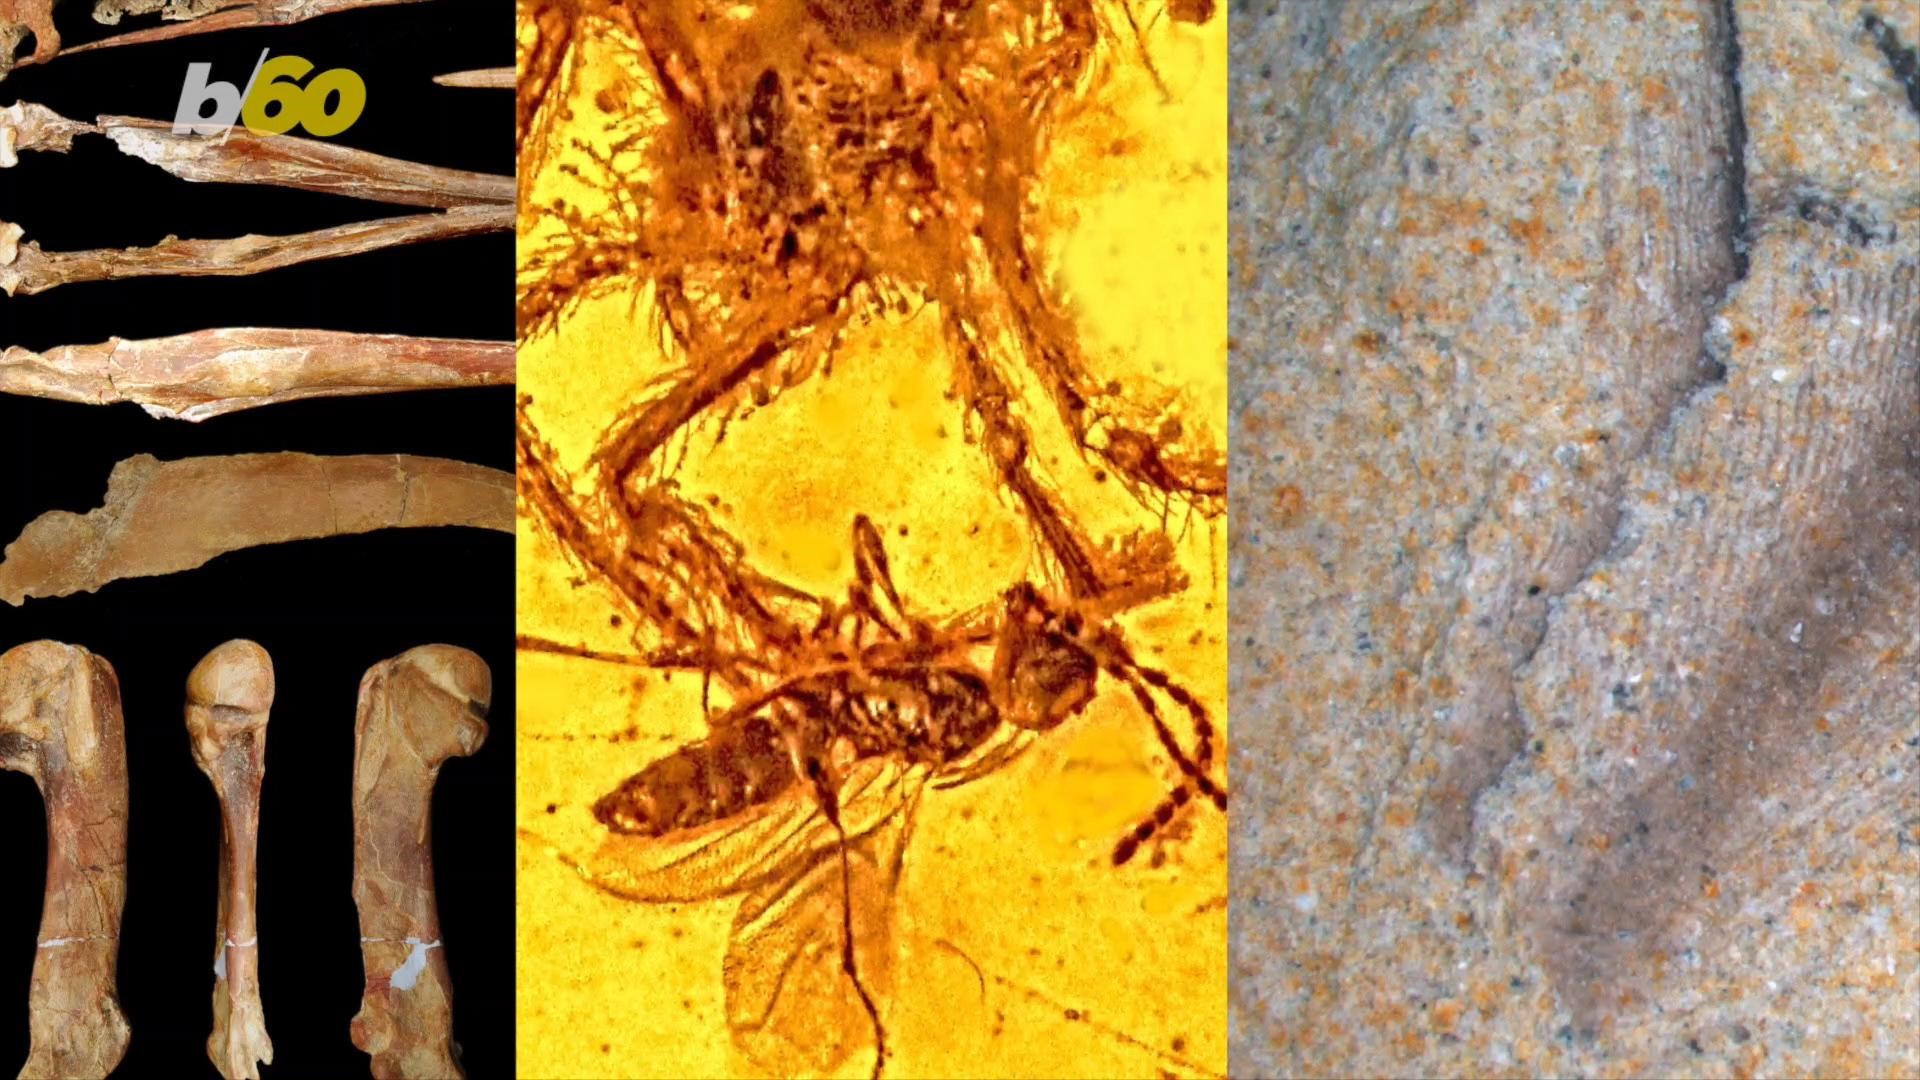 Ancient fossils show us wild worlds we'll never experience, and here are the all-time craziest discoveries.